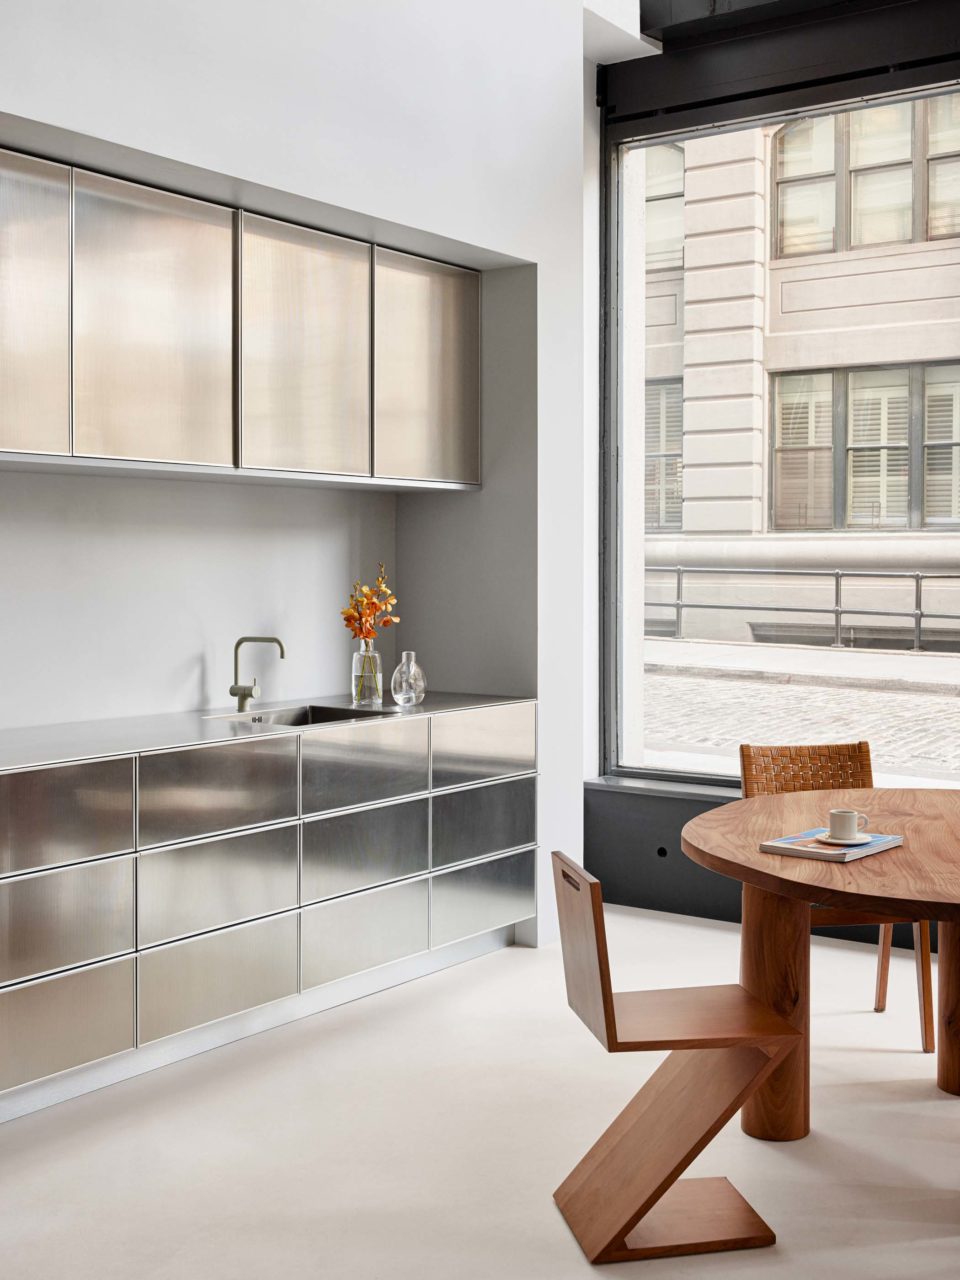 shiny metal cabinets and wood dining furniture